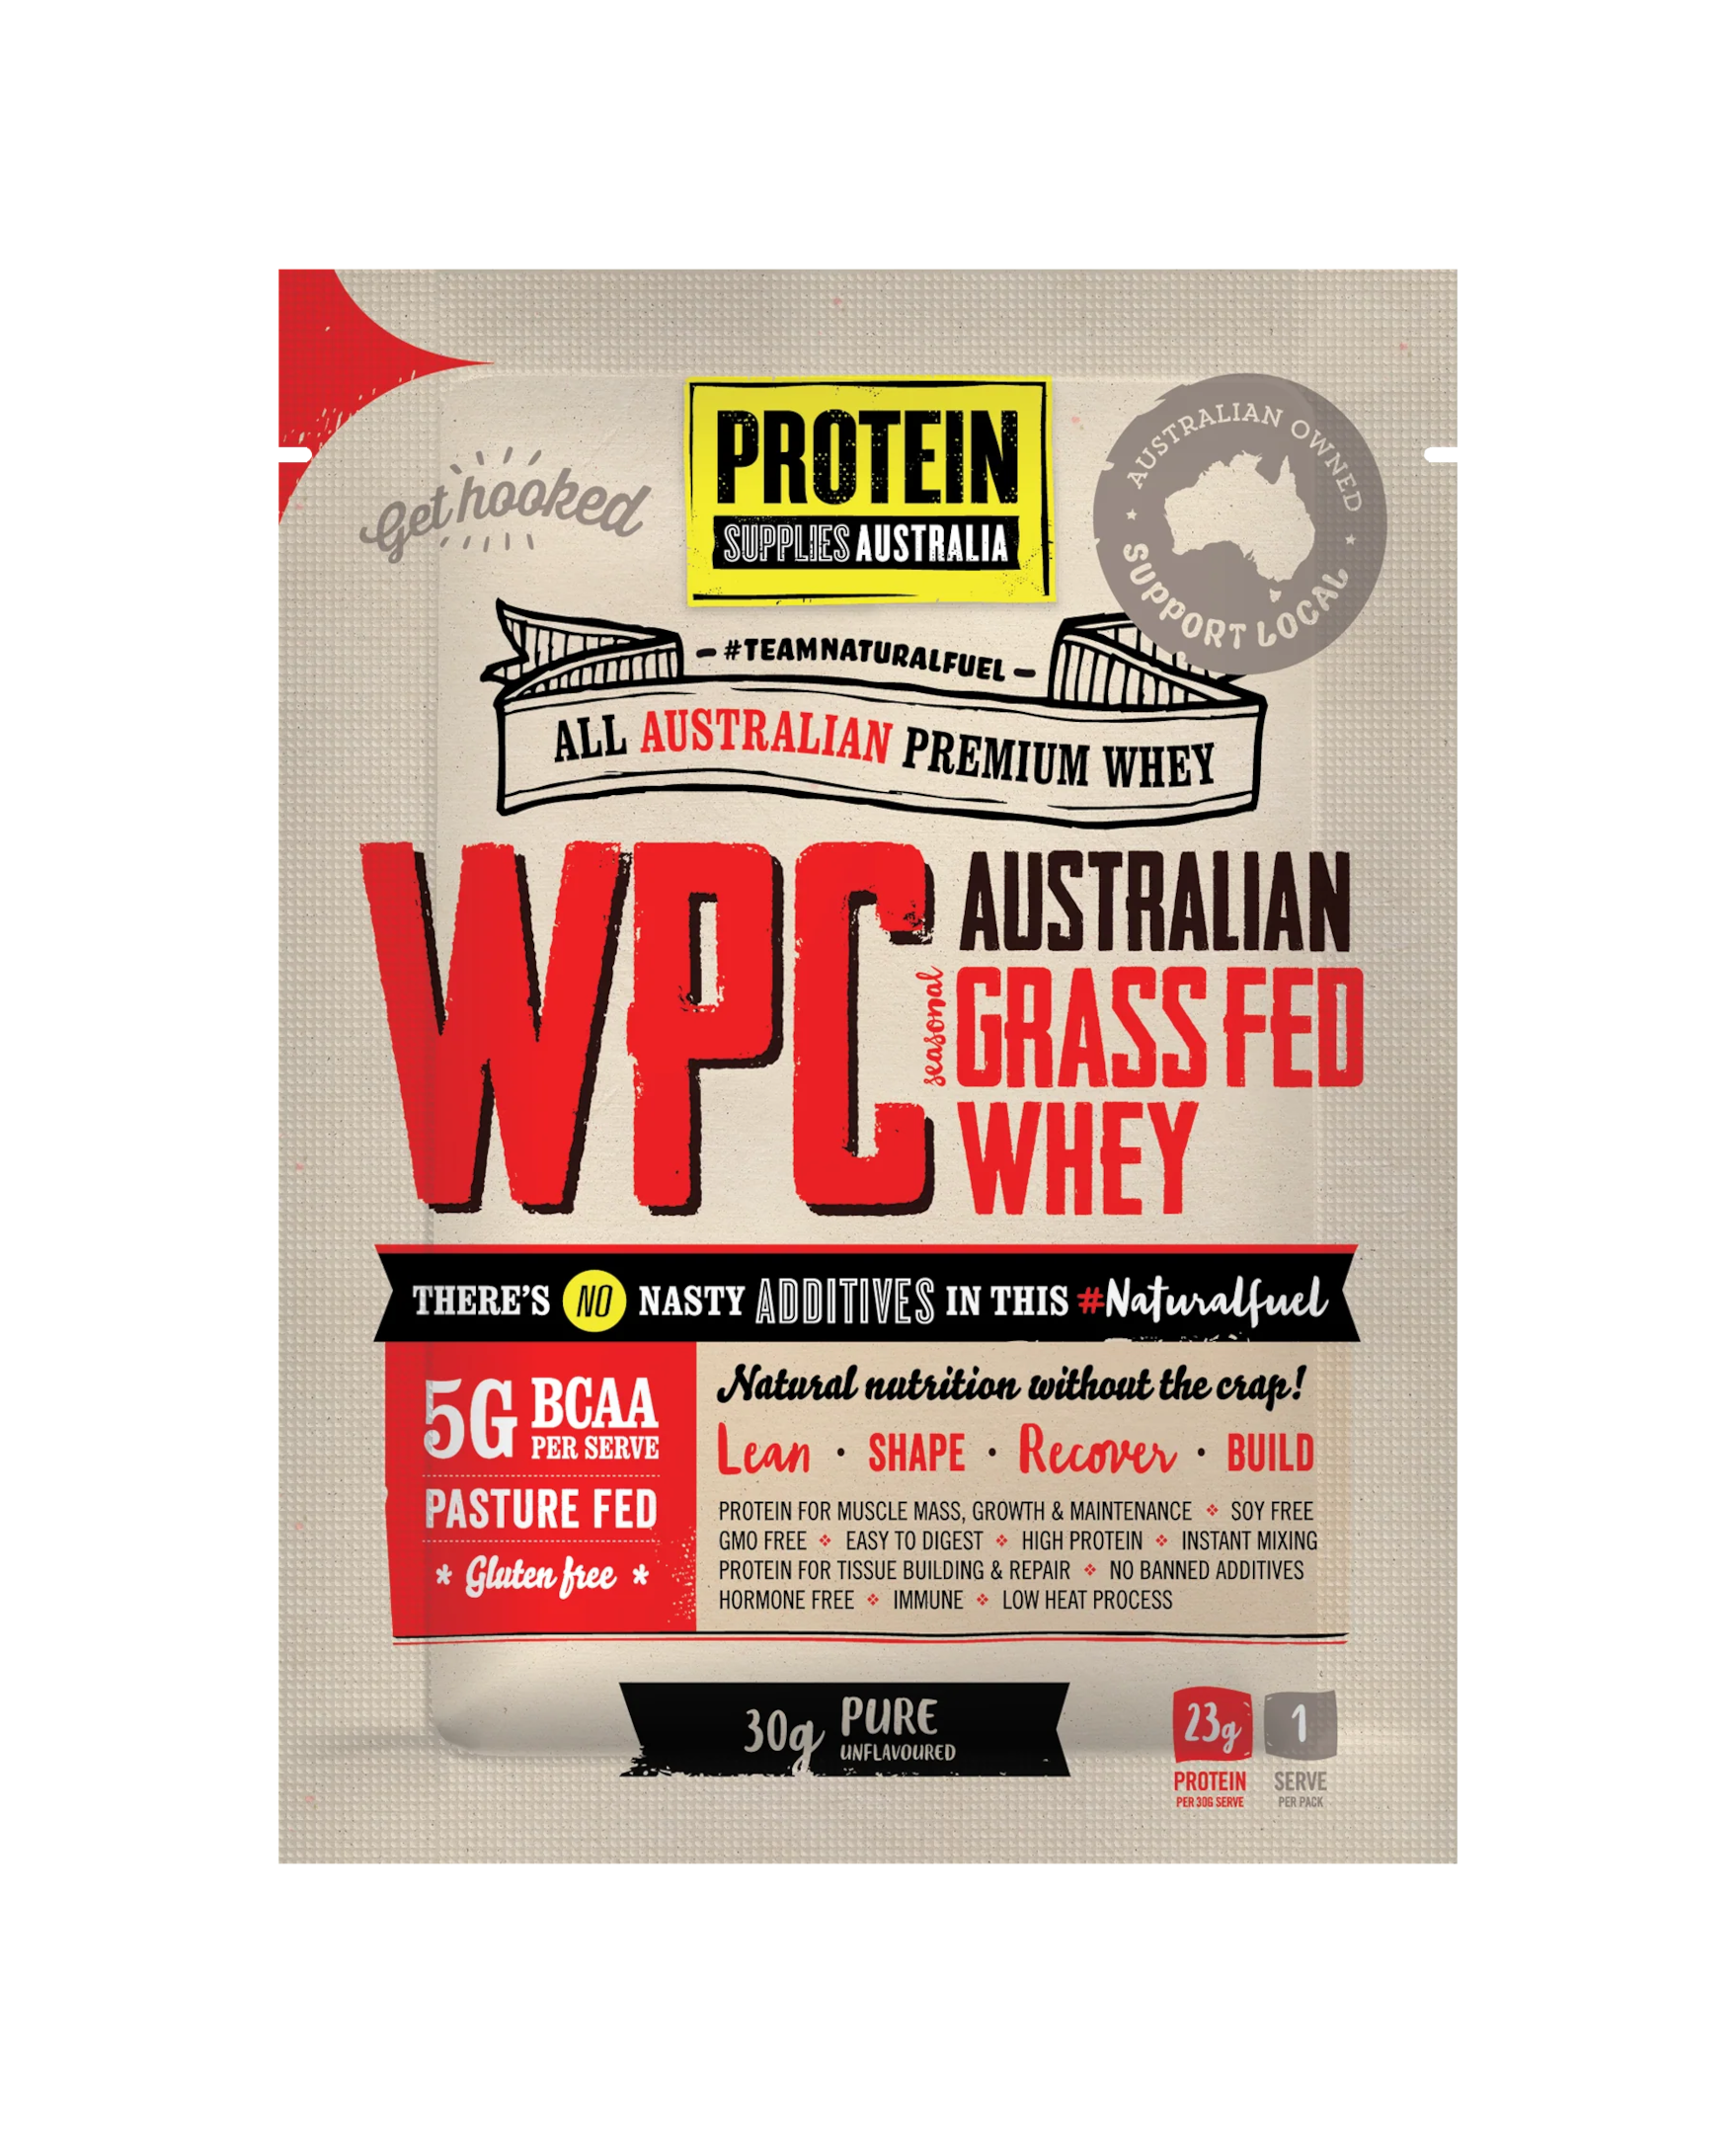 free protein samples, protein powders